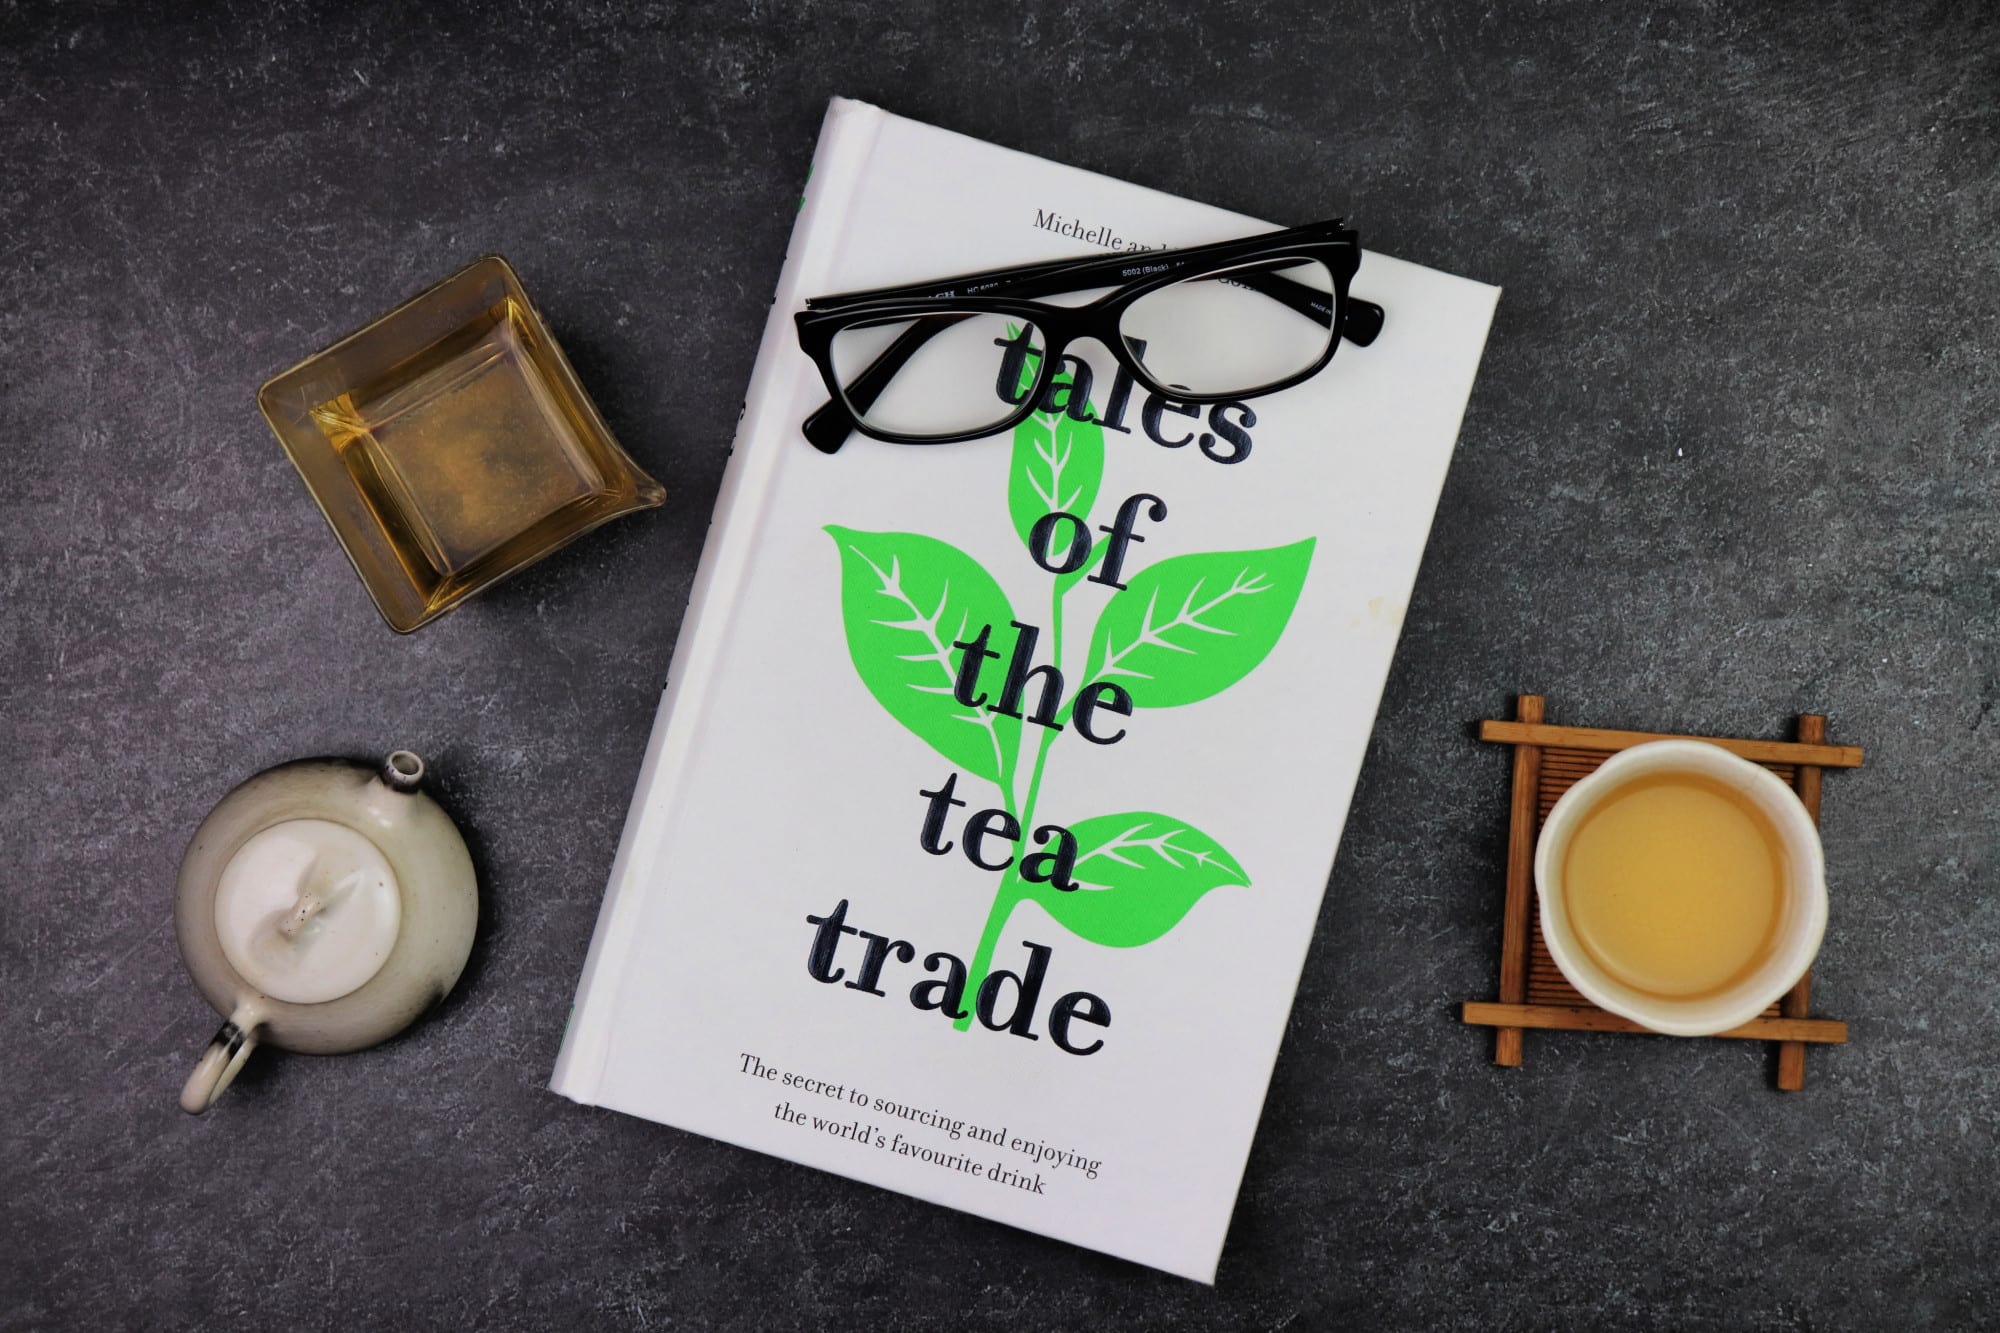 Tales of the Tea Trade: The Secret to Sourcing and Enjoying the World’s Favorite Drink by Michelle and Rob Comins